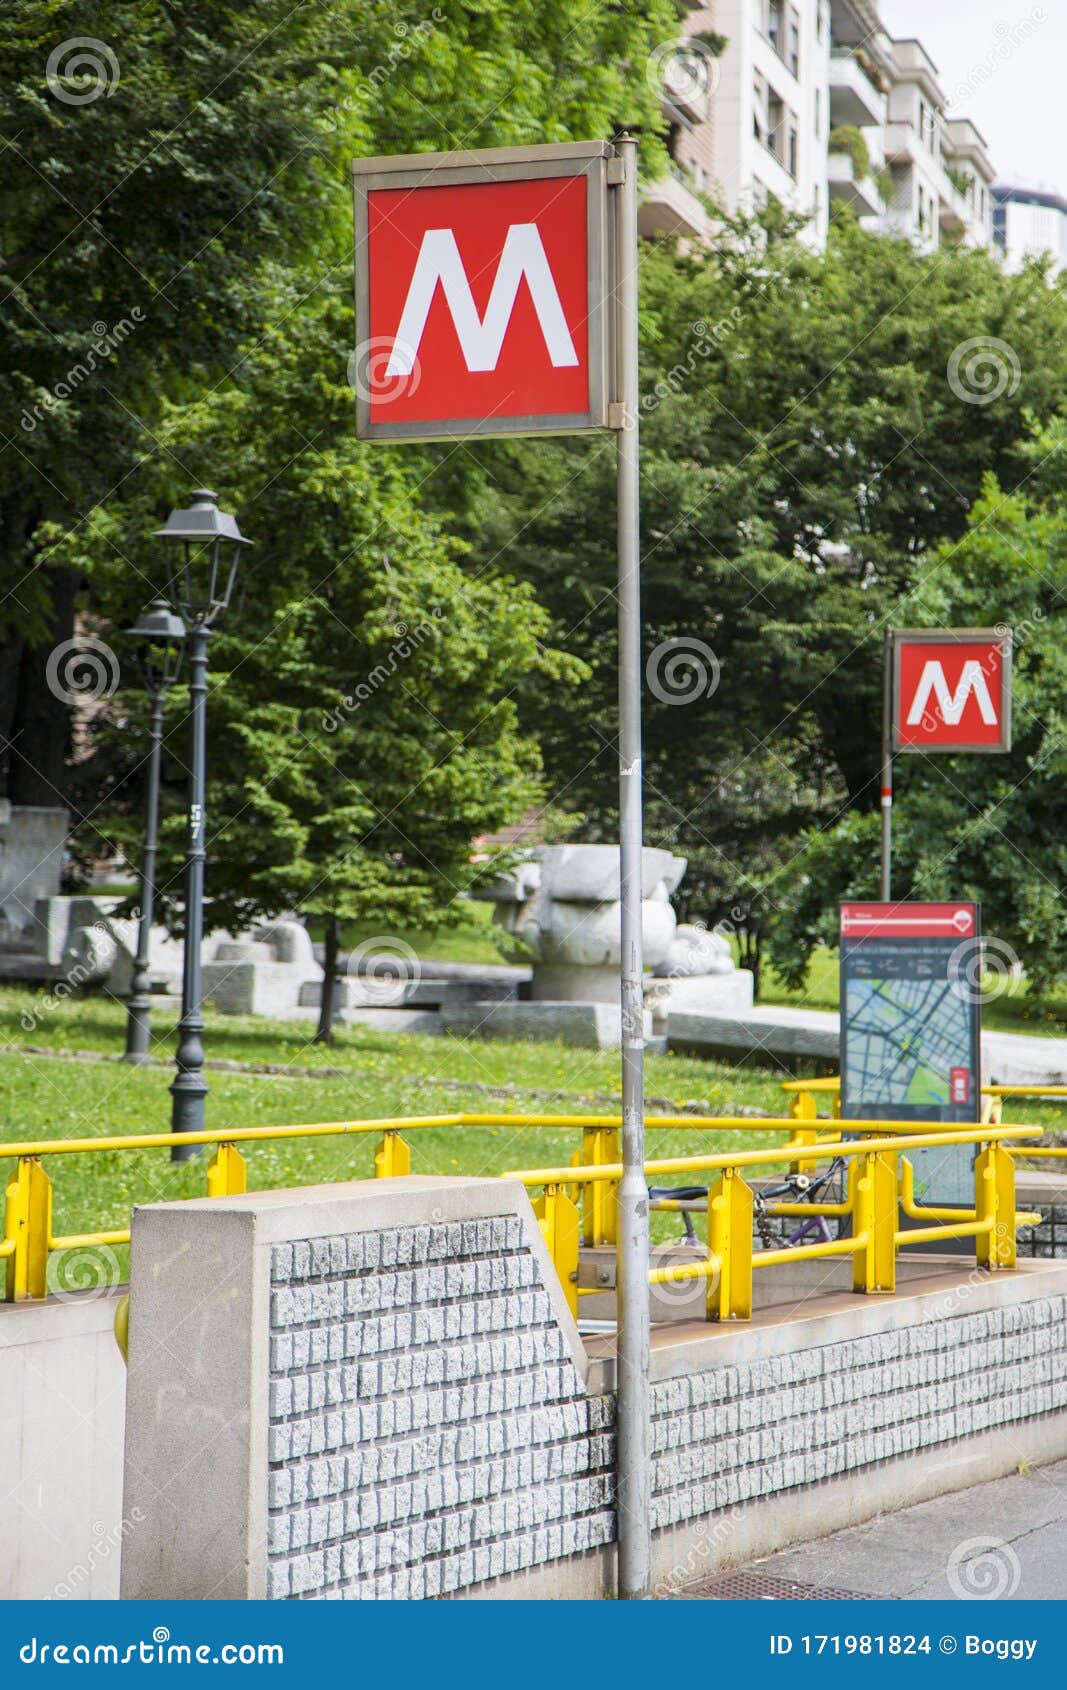 Traditional Metro Signs in Milan, Italy Stock Photo - Image of subway,  station: 171981824